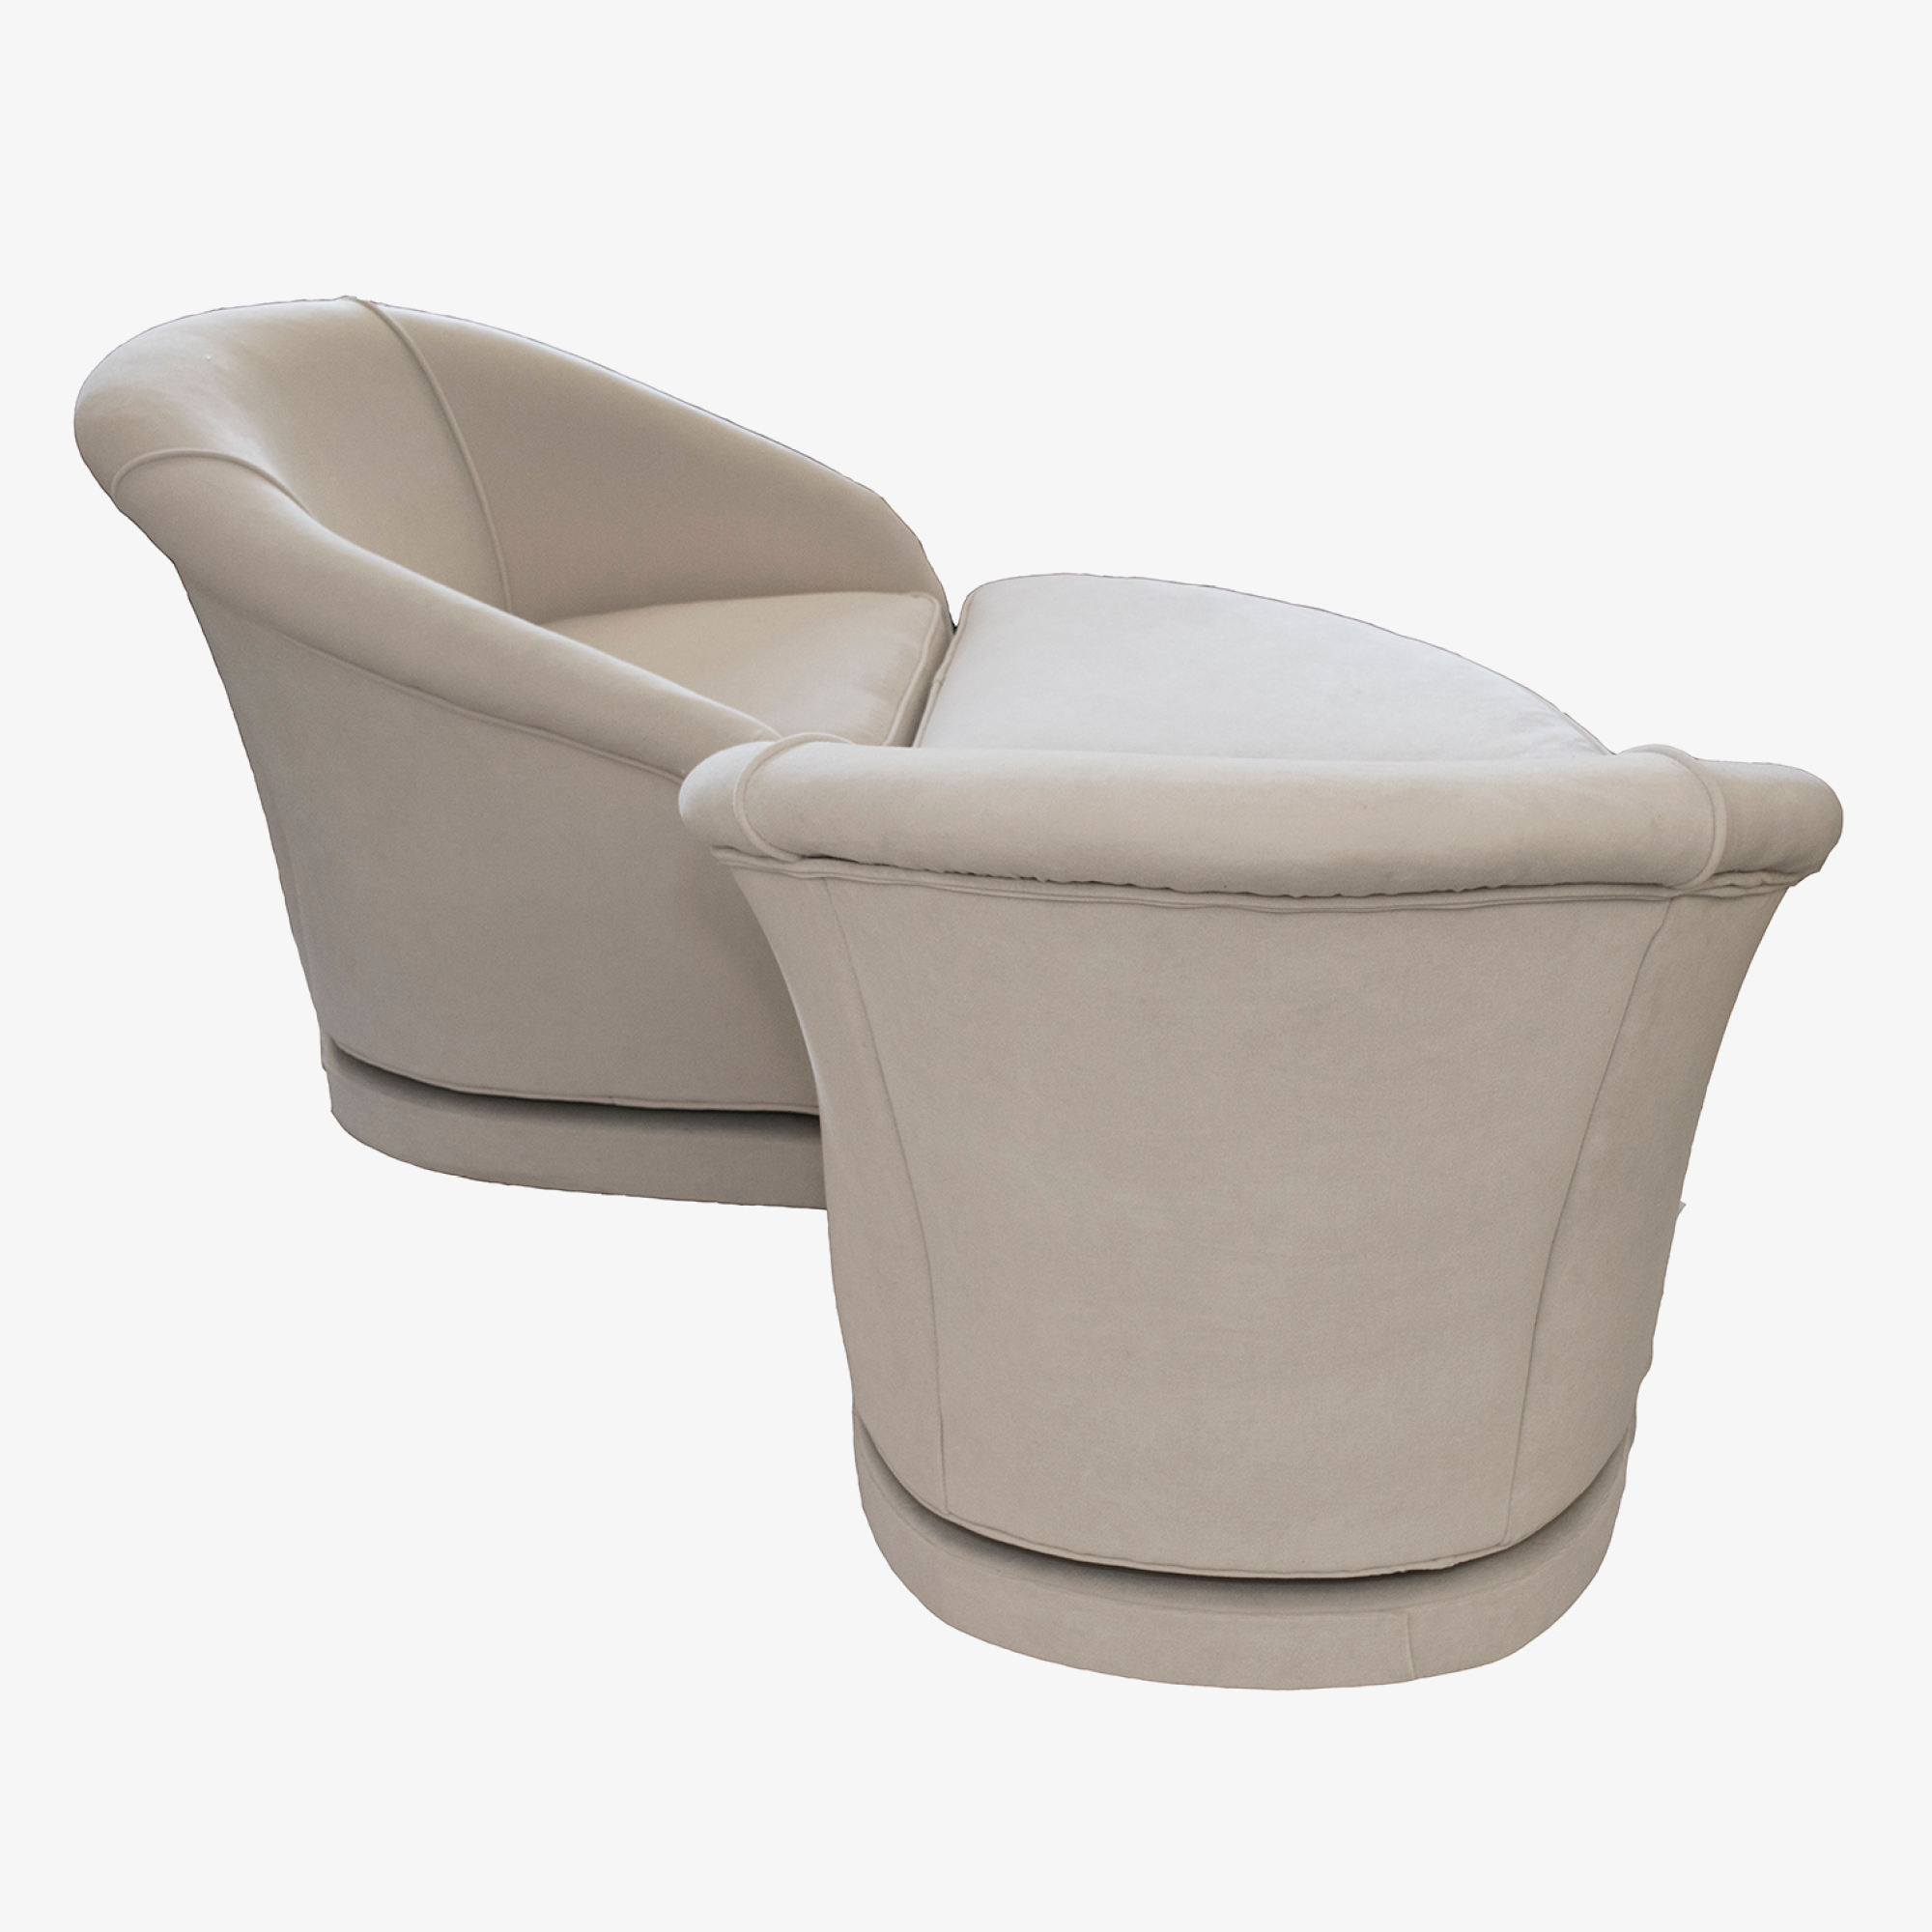 Bespoke Set of Swivel Chairs with Custom Ottoman 2.png